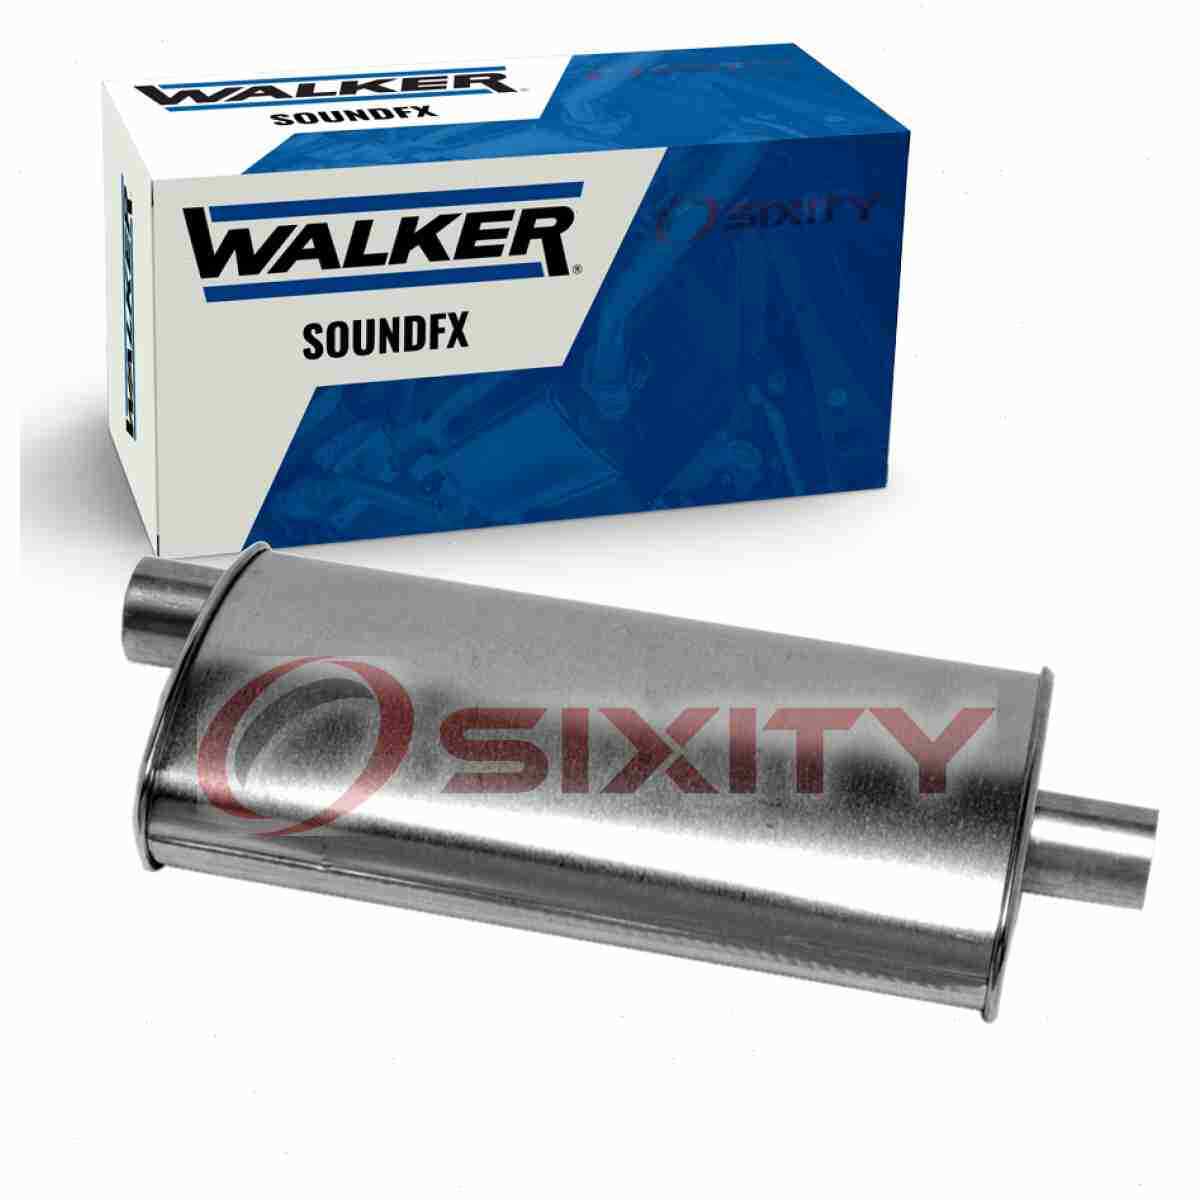 Walker SoundFX Exhaust Muffler for 1991-1995 Plymouth Grand Voyager 3.0L so